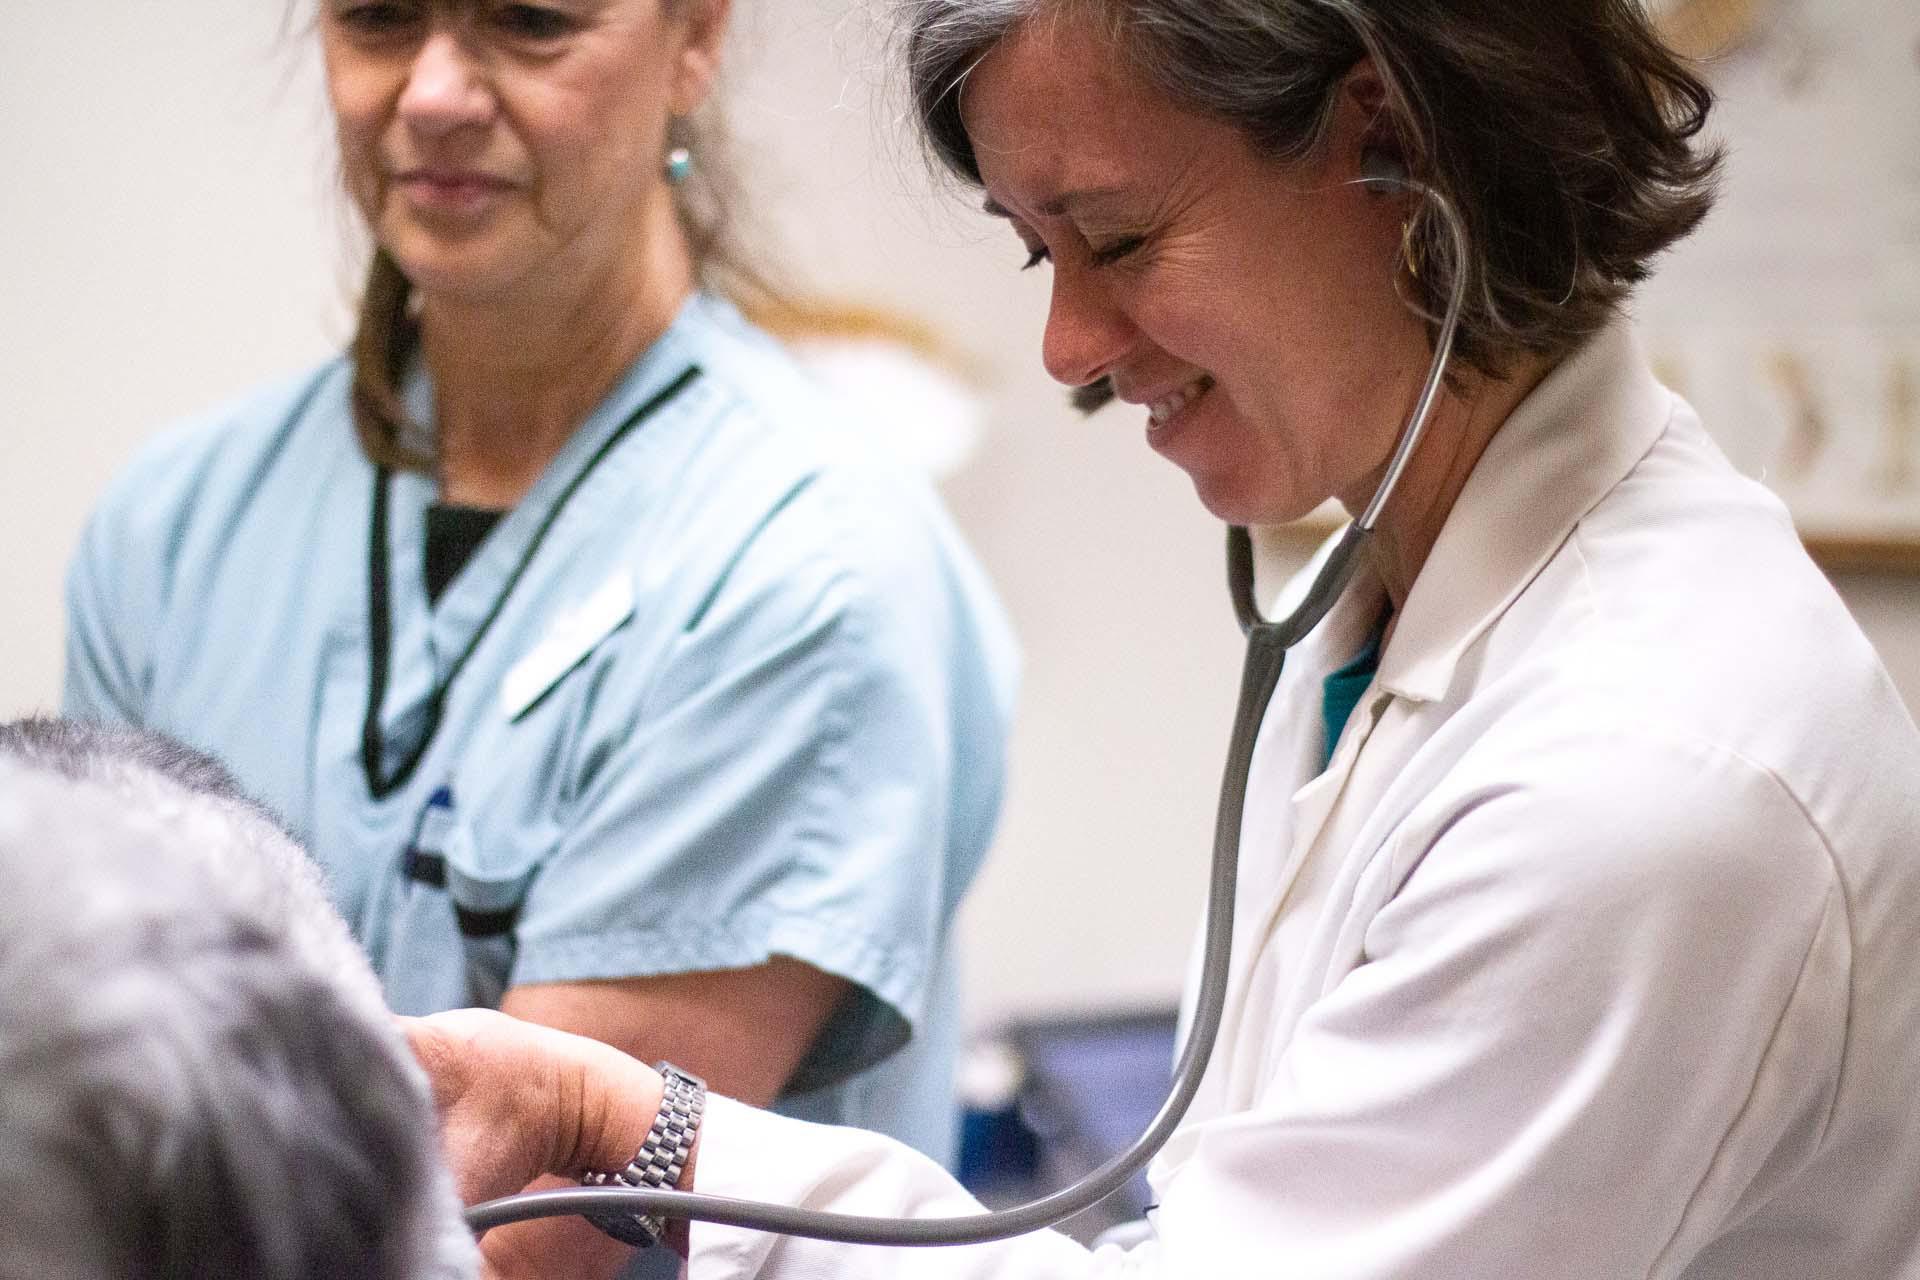 Dr. Bryant uses a stethoscope to listen to a patient’s heart and lungs.